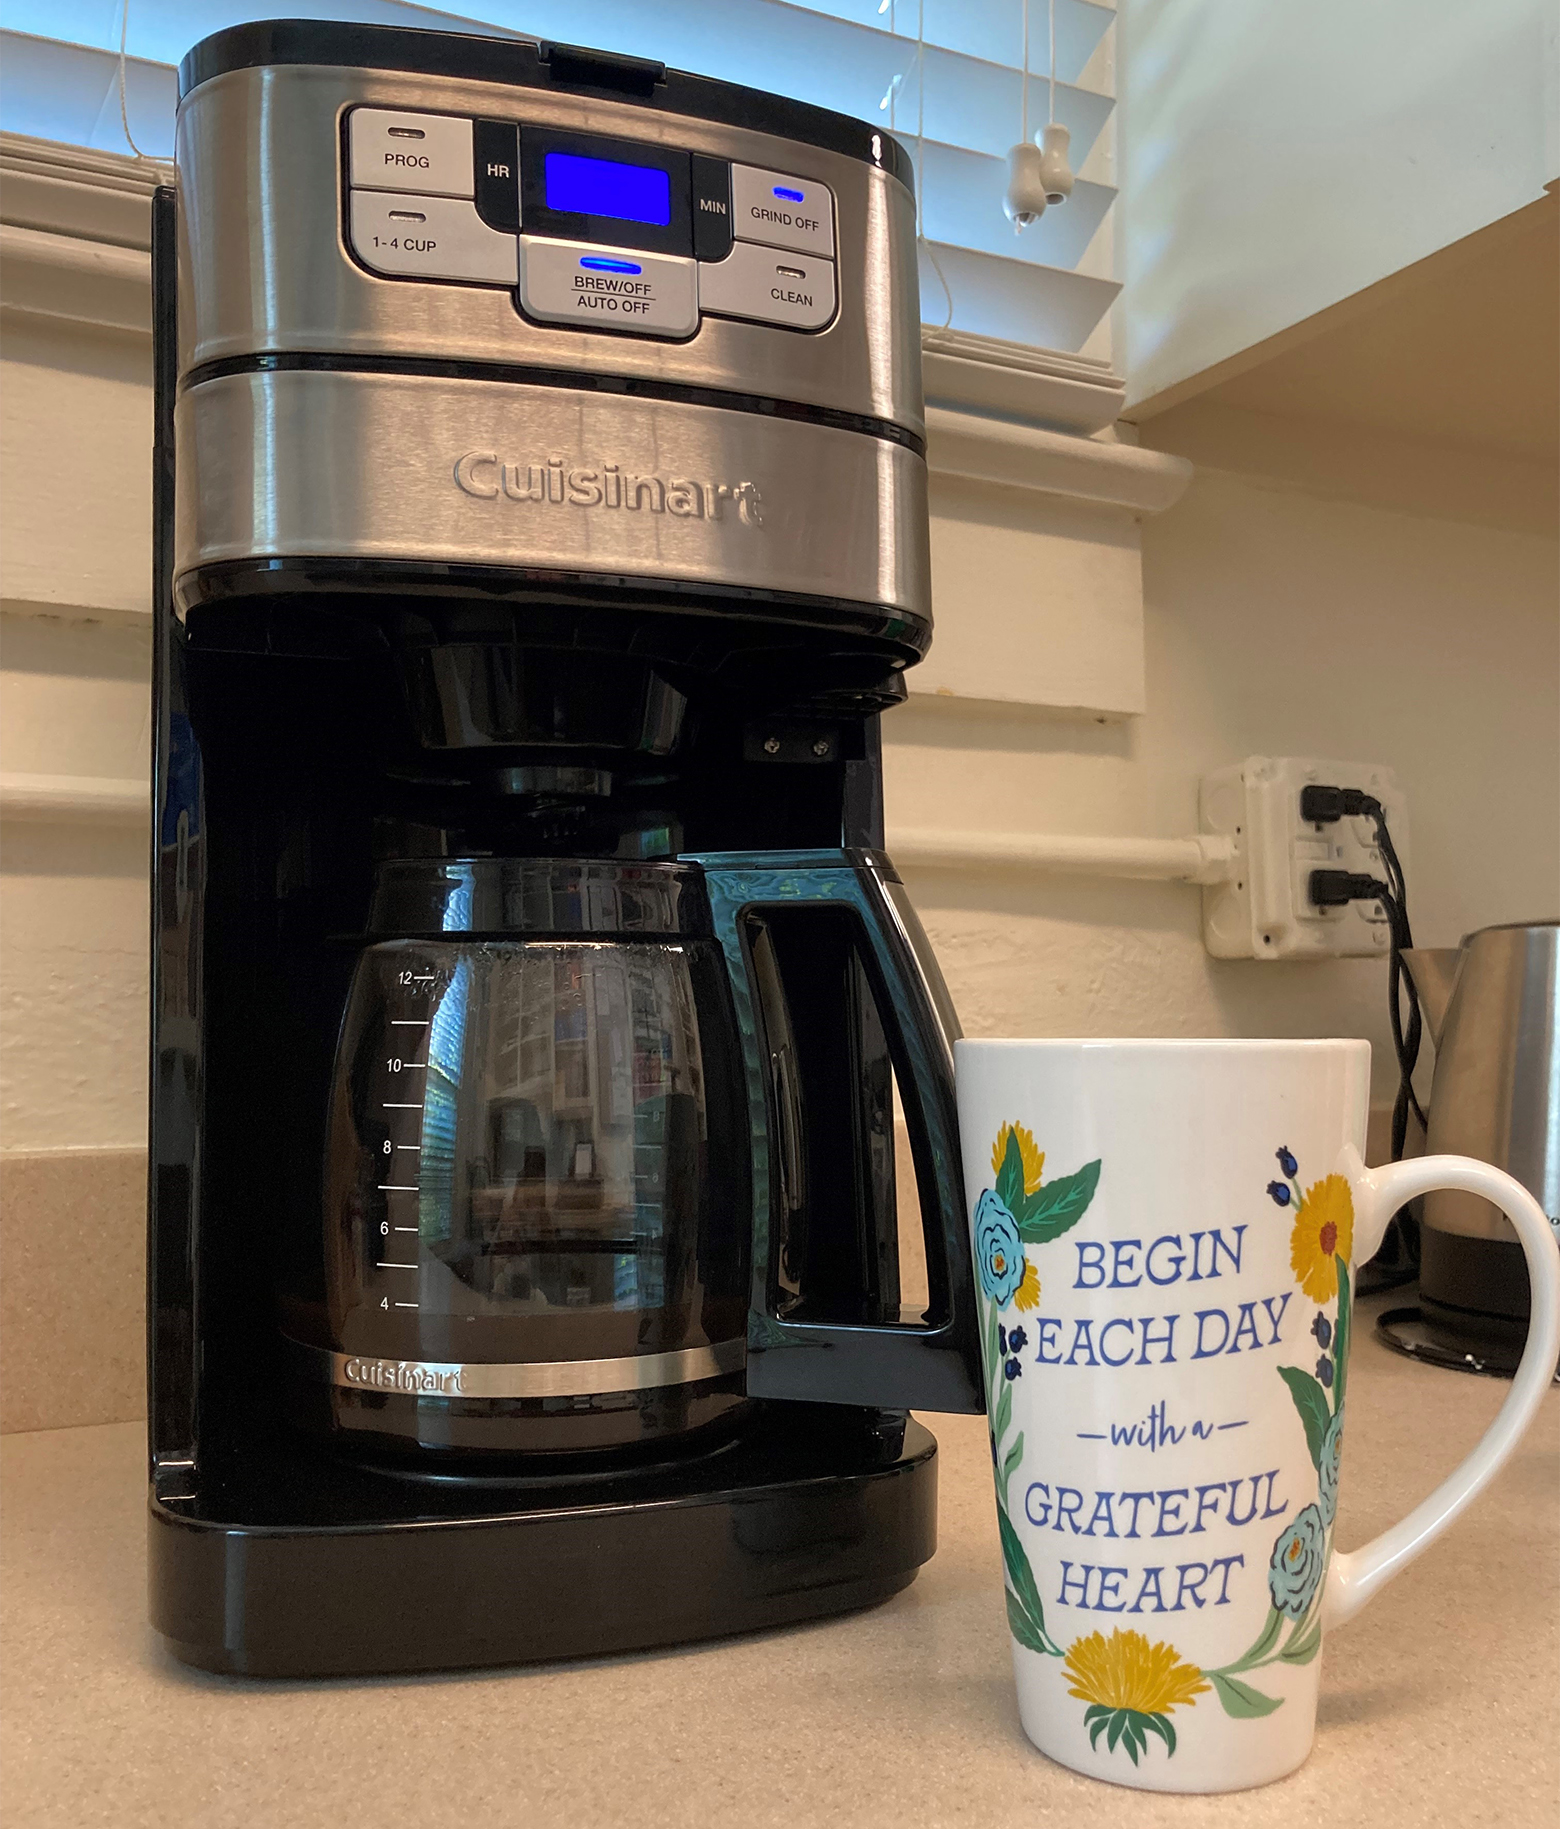 Coffee mug that reads Begin Each Day with a Grateful Heart on a counter next to a Cuisinart drip coffee maker.